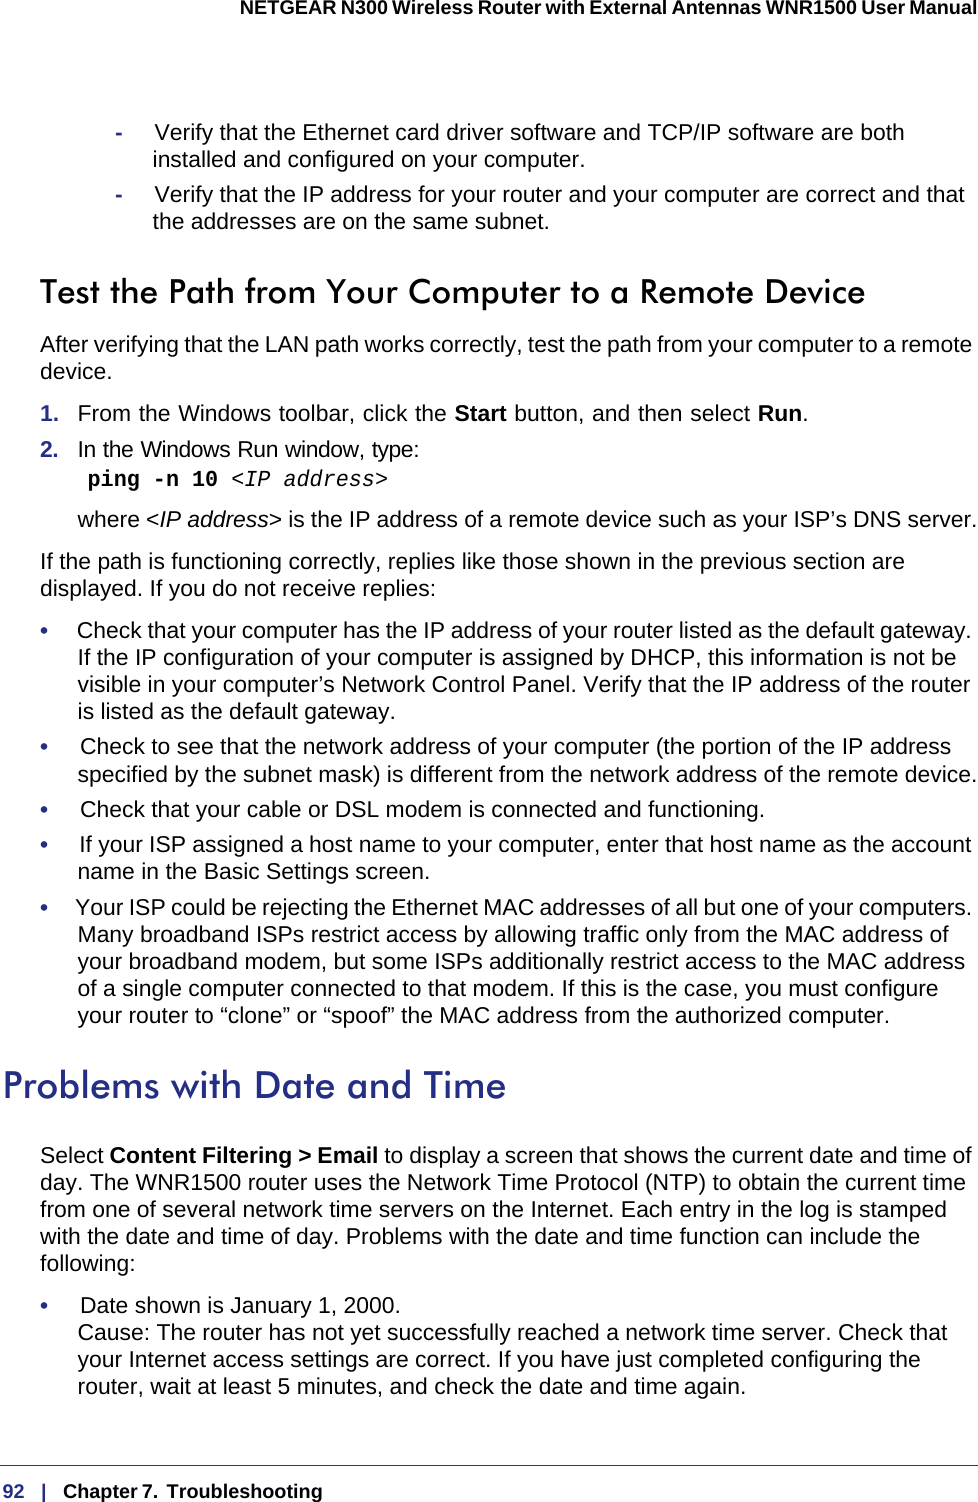 92   |   Chapter 7.  Troubleshooting  NETGEAR N300 Wireless Router with External Antennas WNR1500 User Manual -     Verify that the Ethernet card driver software and TCP/IP software are both installed and configured on your computer.-     Verify that the IP address for your router and your computer are correct and that the addresses are on the same subnet.Test the Path from Your Computer to a Remote DeviceAfter verifying that the LAN path works correctly, test the path from your computer to a remote device. 1.  From the Windows toolbar, click the Start button, and then select Run.2.  In the Windows Run window, type:    ping -n 10 &lt;IP address&gt;where &lt;IP address&gt; is the IP address of a remote device such as your ISP’s DNS server.If the path is functioning correctly, replies like those shown in the previous section are displayed. If you do not receive replies:•     Check that your computer has the IP address of your router listed as the default gateway. If the IP configuration of your computer is assigned by DHCP, this information is not be visible in your computer’s Network Control Panel. Verify that the IP address of the router is listed as the default gateway.•     Check to see that the network address of your computer (the portion of the IP address specified by the subnet mask) is different from the network address of the remote device.•     Check that your cable or DSL modem is connected and functioning.•     If your ISP assigned a host name to your computer, enter that host name as the account name in the Basic Settings screen.•     Your ISP could be rejecting the Ethernet MAC addresses of all but one of your computers. Many broadband ISPs restrict access by allowing traffic only from the MAC address of your broadband modem, but some ISPs additionally restrict access to the MAC address of a single computer connected to that modem. If this is the case, you must configure your router to “clone” or “spoof” the MAC address from the authorized computer. Problems with Date and TimeSelect Content Filtering &gt; Email to display a screen that shows the current date and time of day. The WNR1500 router uses the Network Time Protocol (NTP) to obtain the current time from one of several network time servers on the Internet. Each entry in the log is stamped with the date and time of day. Problems with the date and time function can include the following:•     Date shown is January 1, 2000. Cause: The router has not yet successfully reached a network time server. Check that your Internet access settings are correct. If you have just completed configuring the router, wait at least 5 minutes, and check the date and time again.